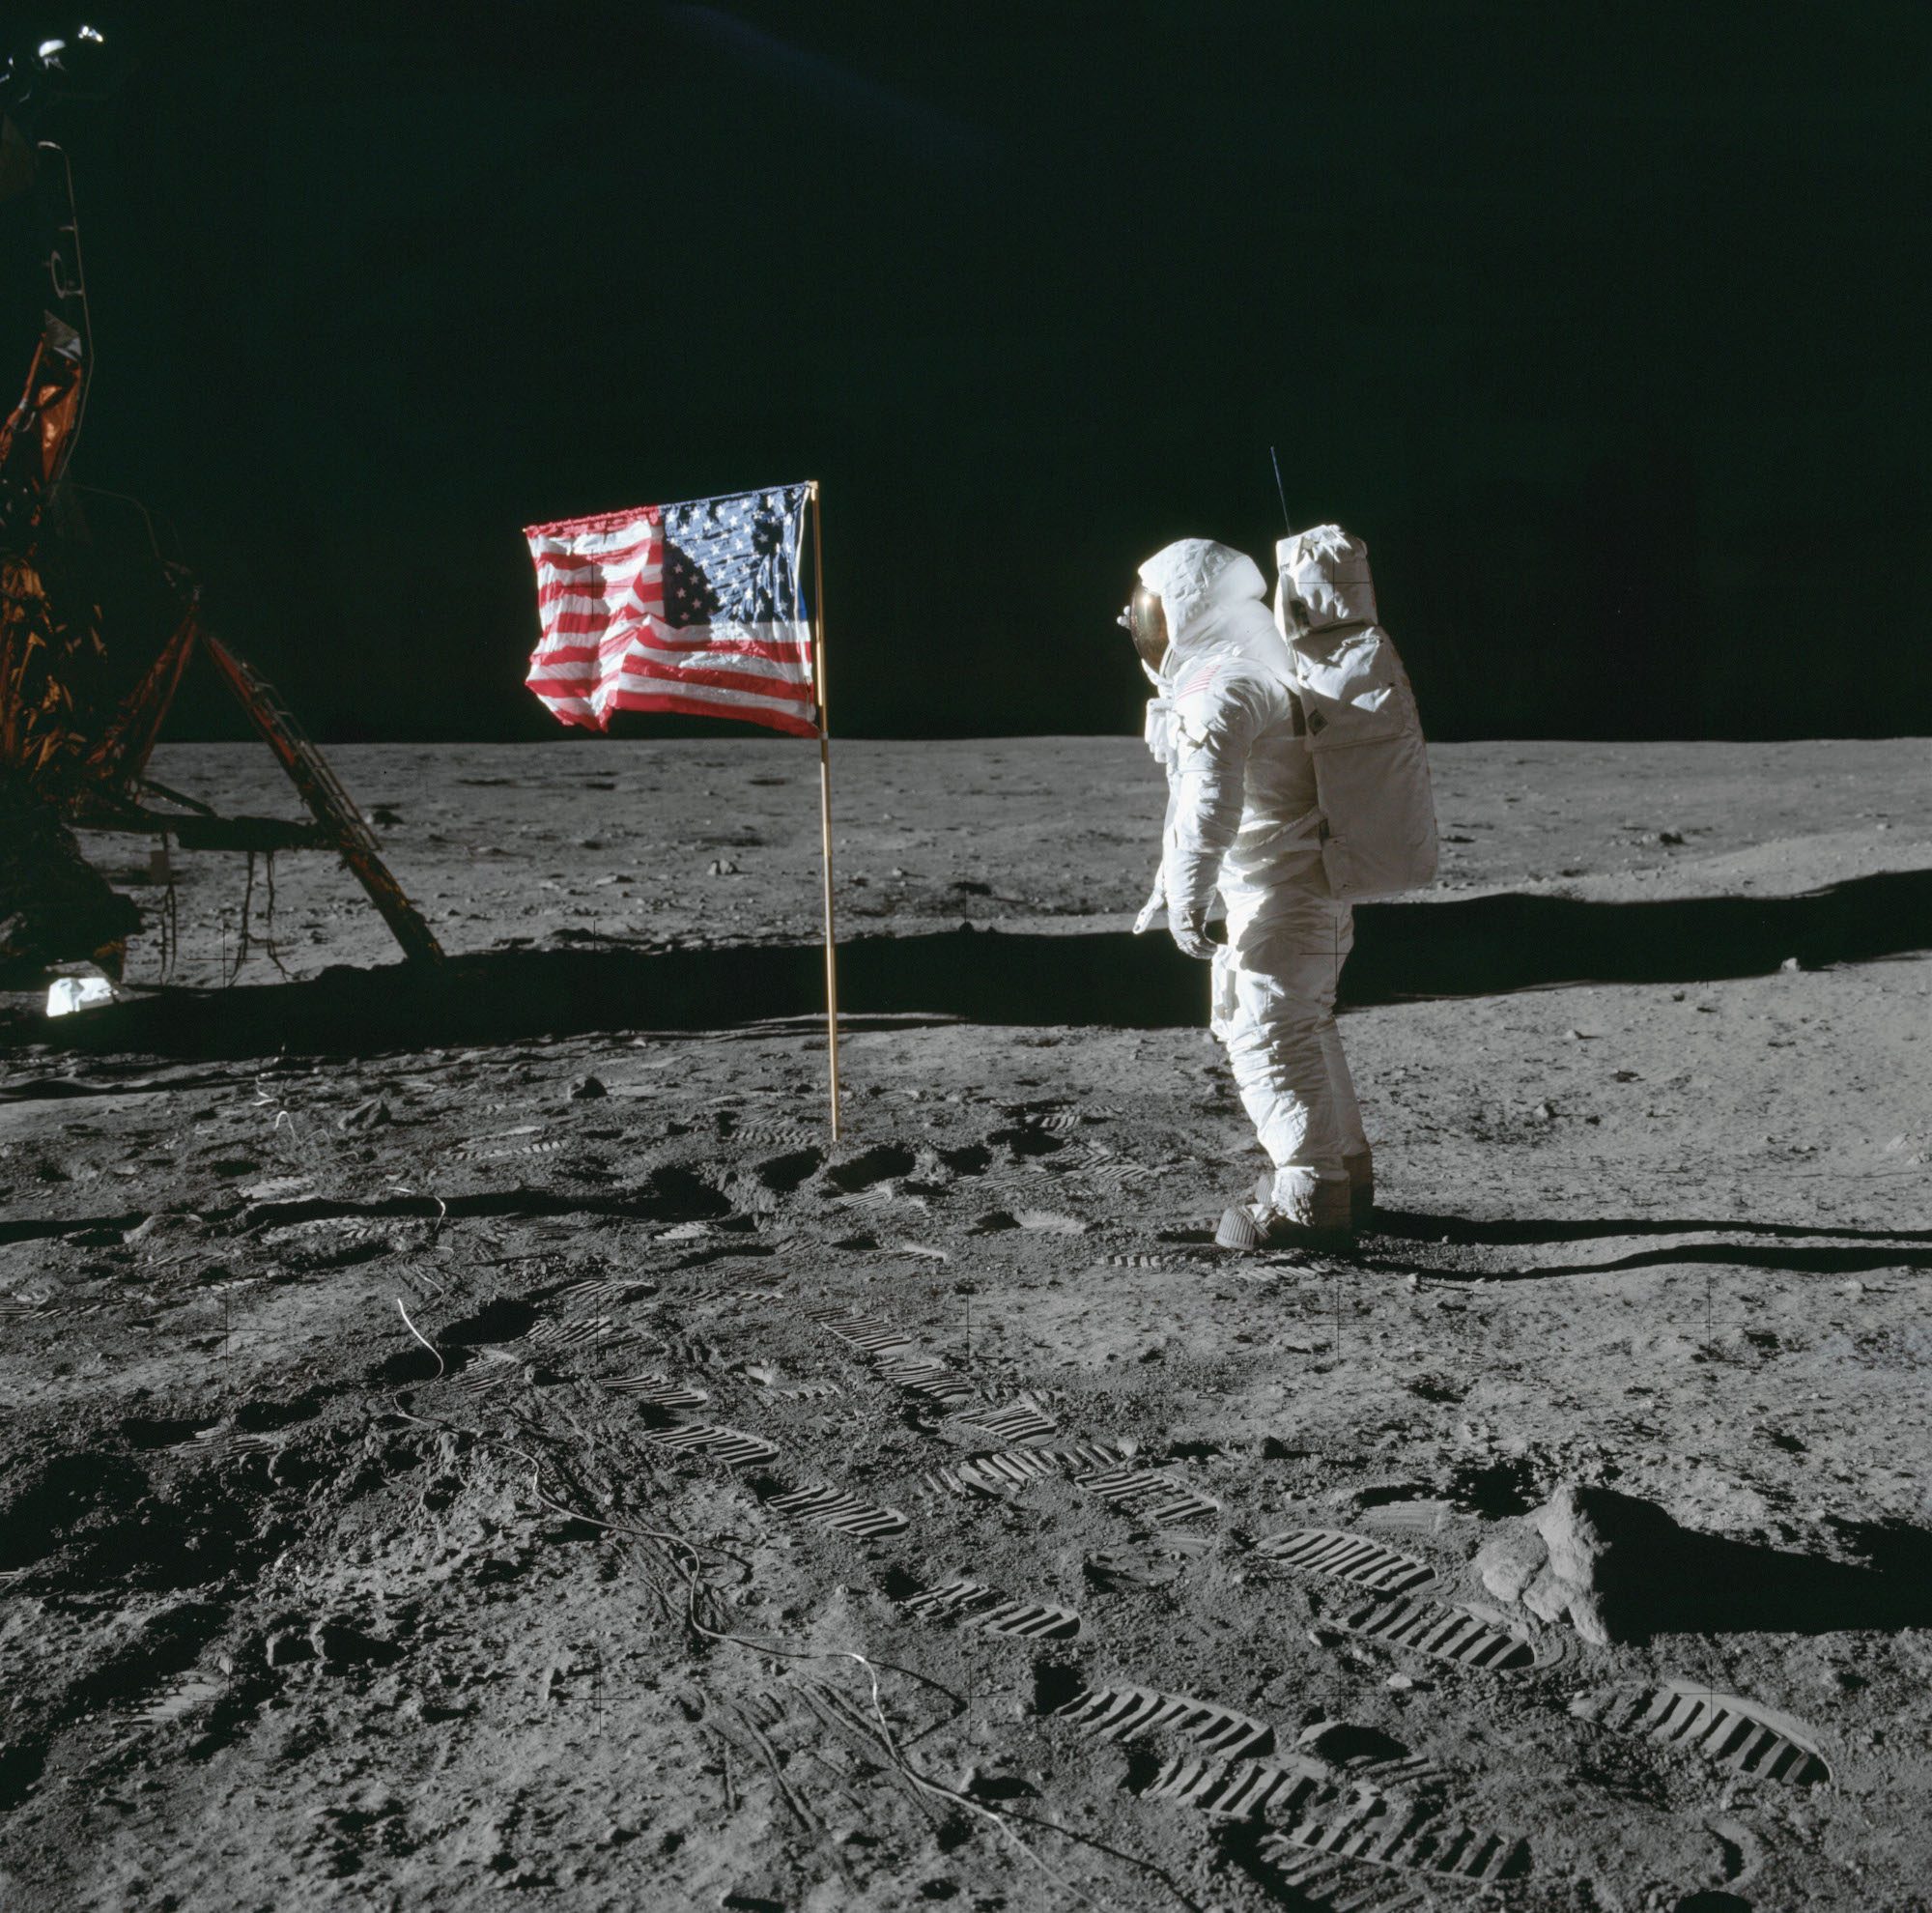 Buzz Aldrin poses beside the deployed United States flag during Apollo 11 extravehicular activity on the lunar surface